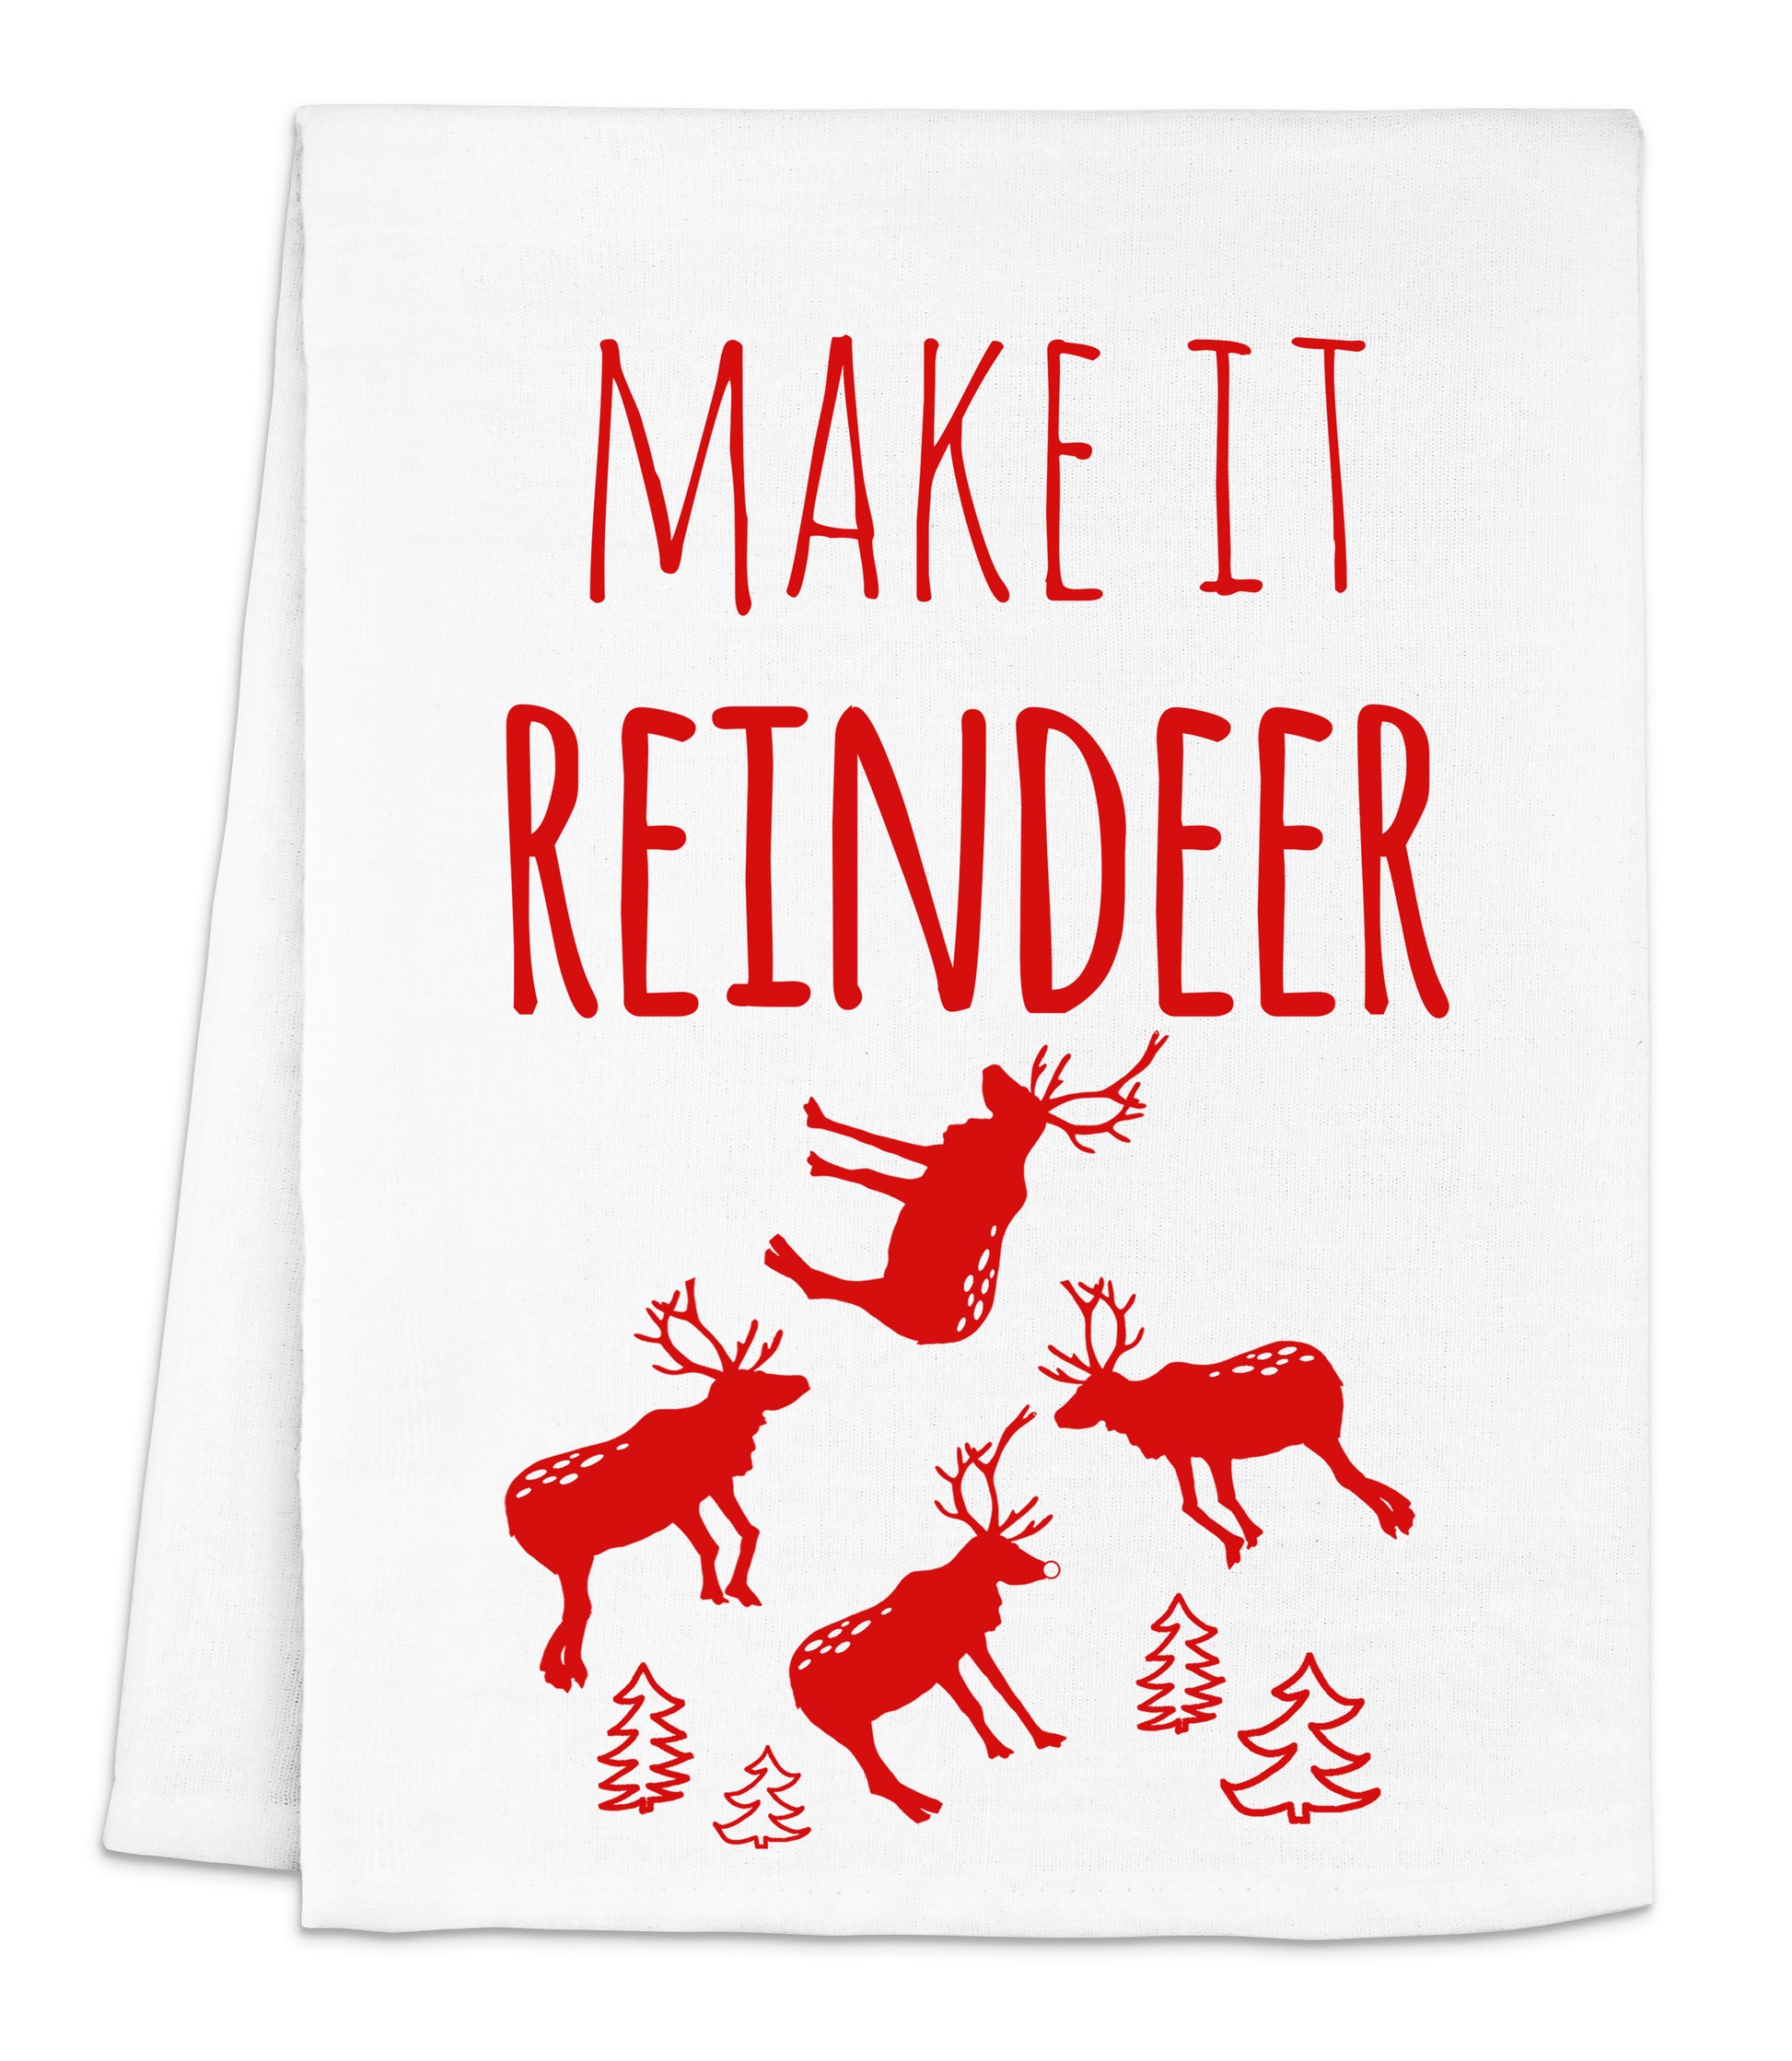 a tea towel with reindeers and trees printed on it